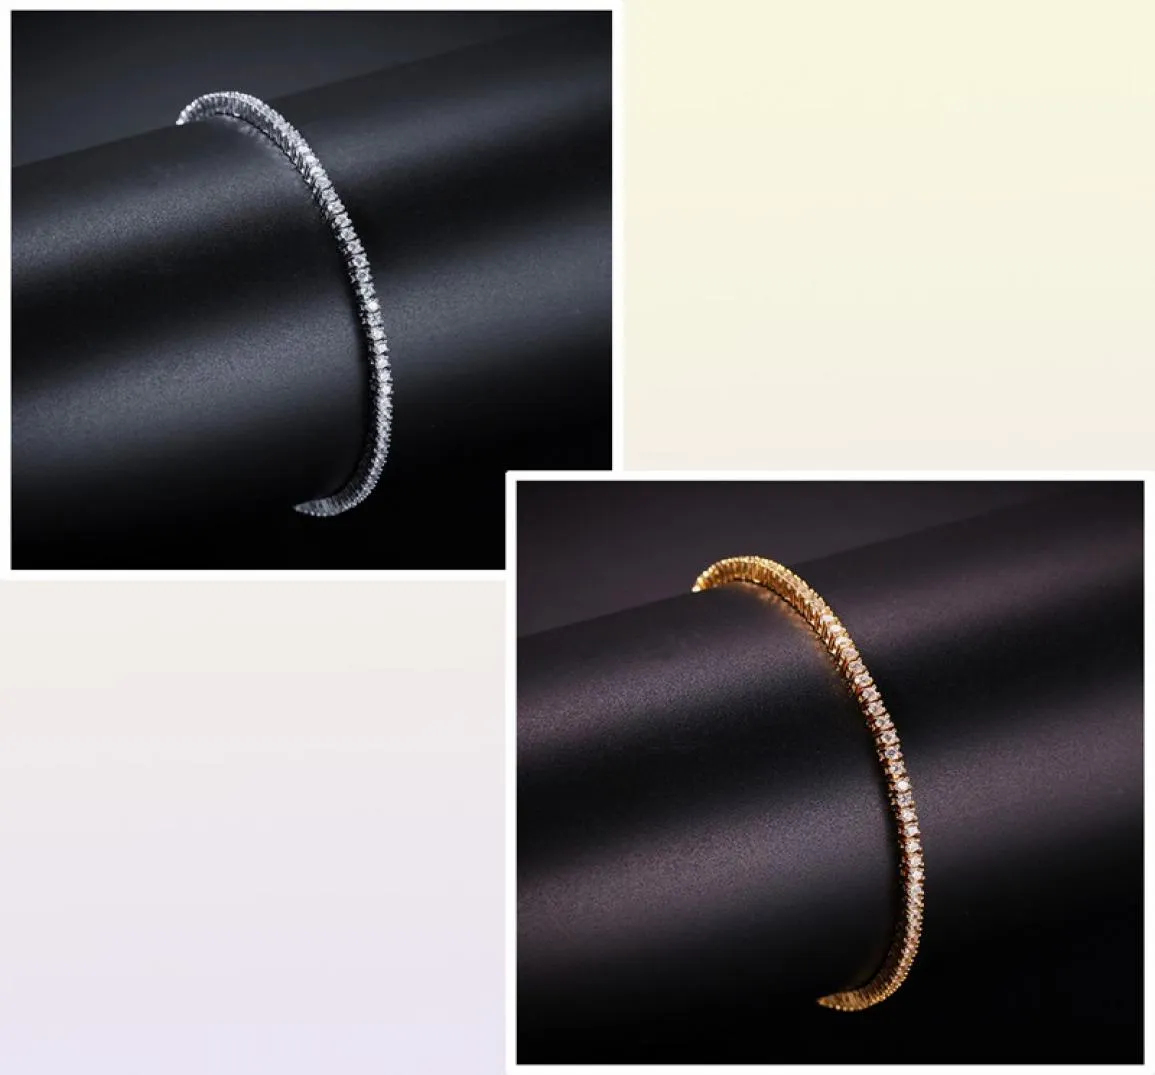 2mm5mm Cubic Zirconia Of 789 inch Tennis Bracelet Copper Jewelry WhiteGold Plated Bangle W12183869491